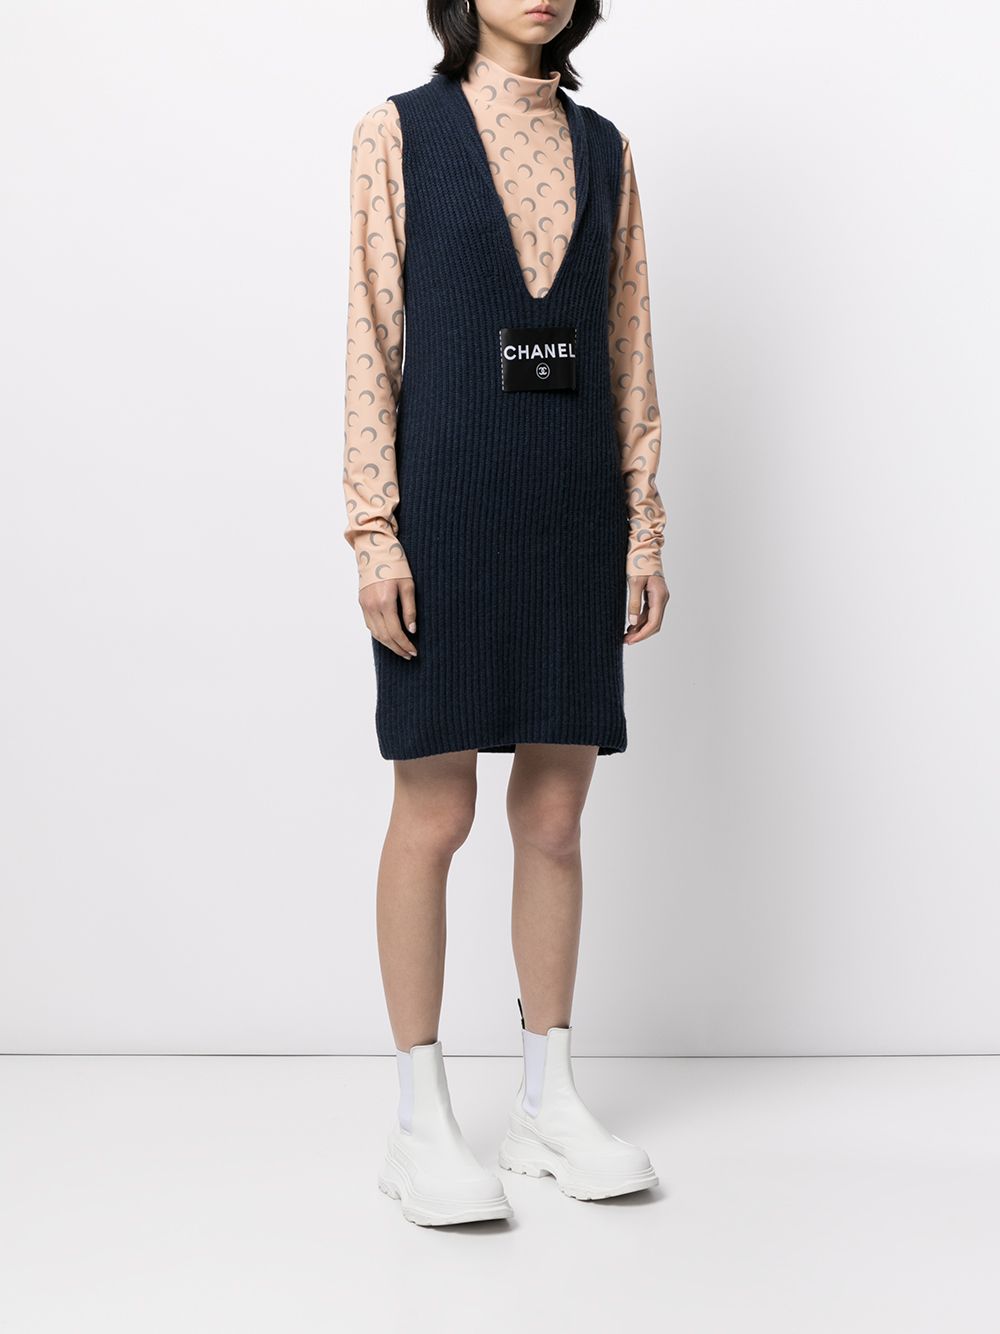 CHANEL Pre-Owned 2008 Plunging Neck Knitted Dress - Farfetch